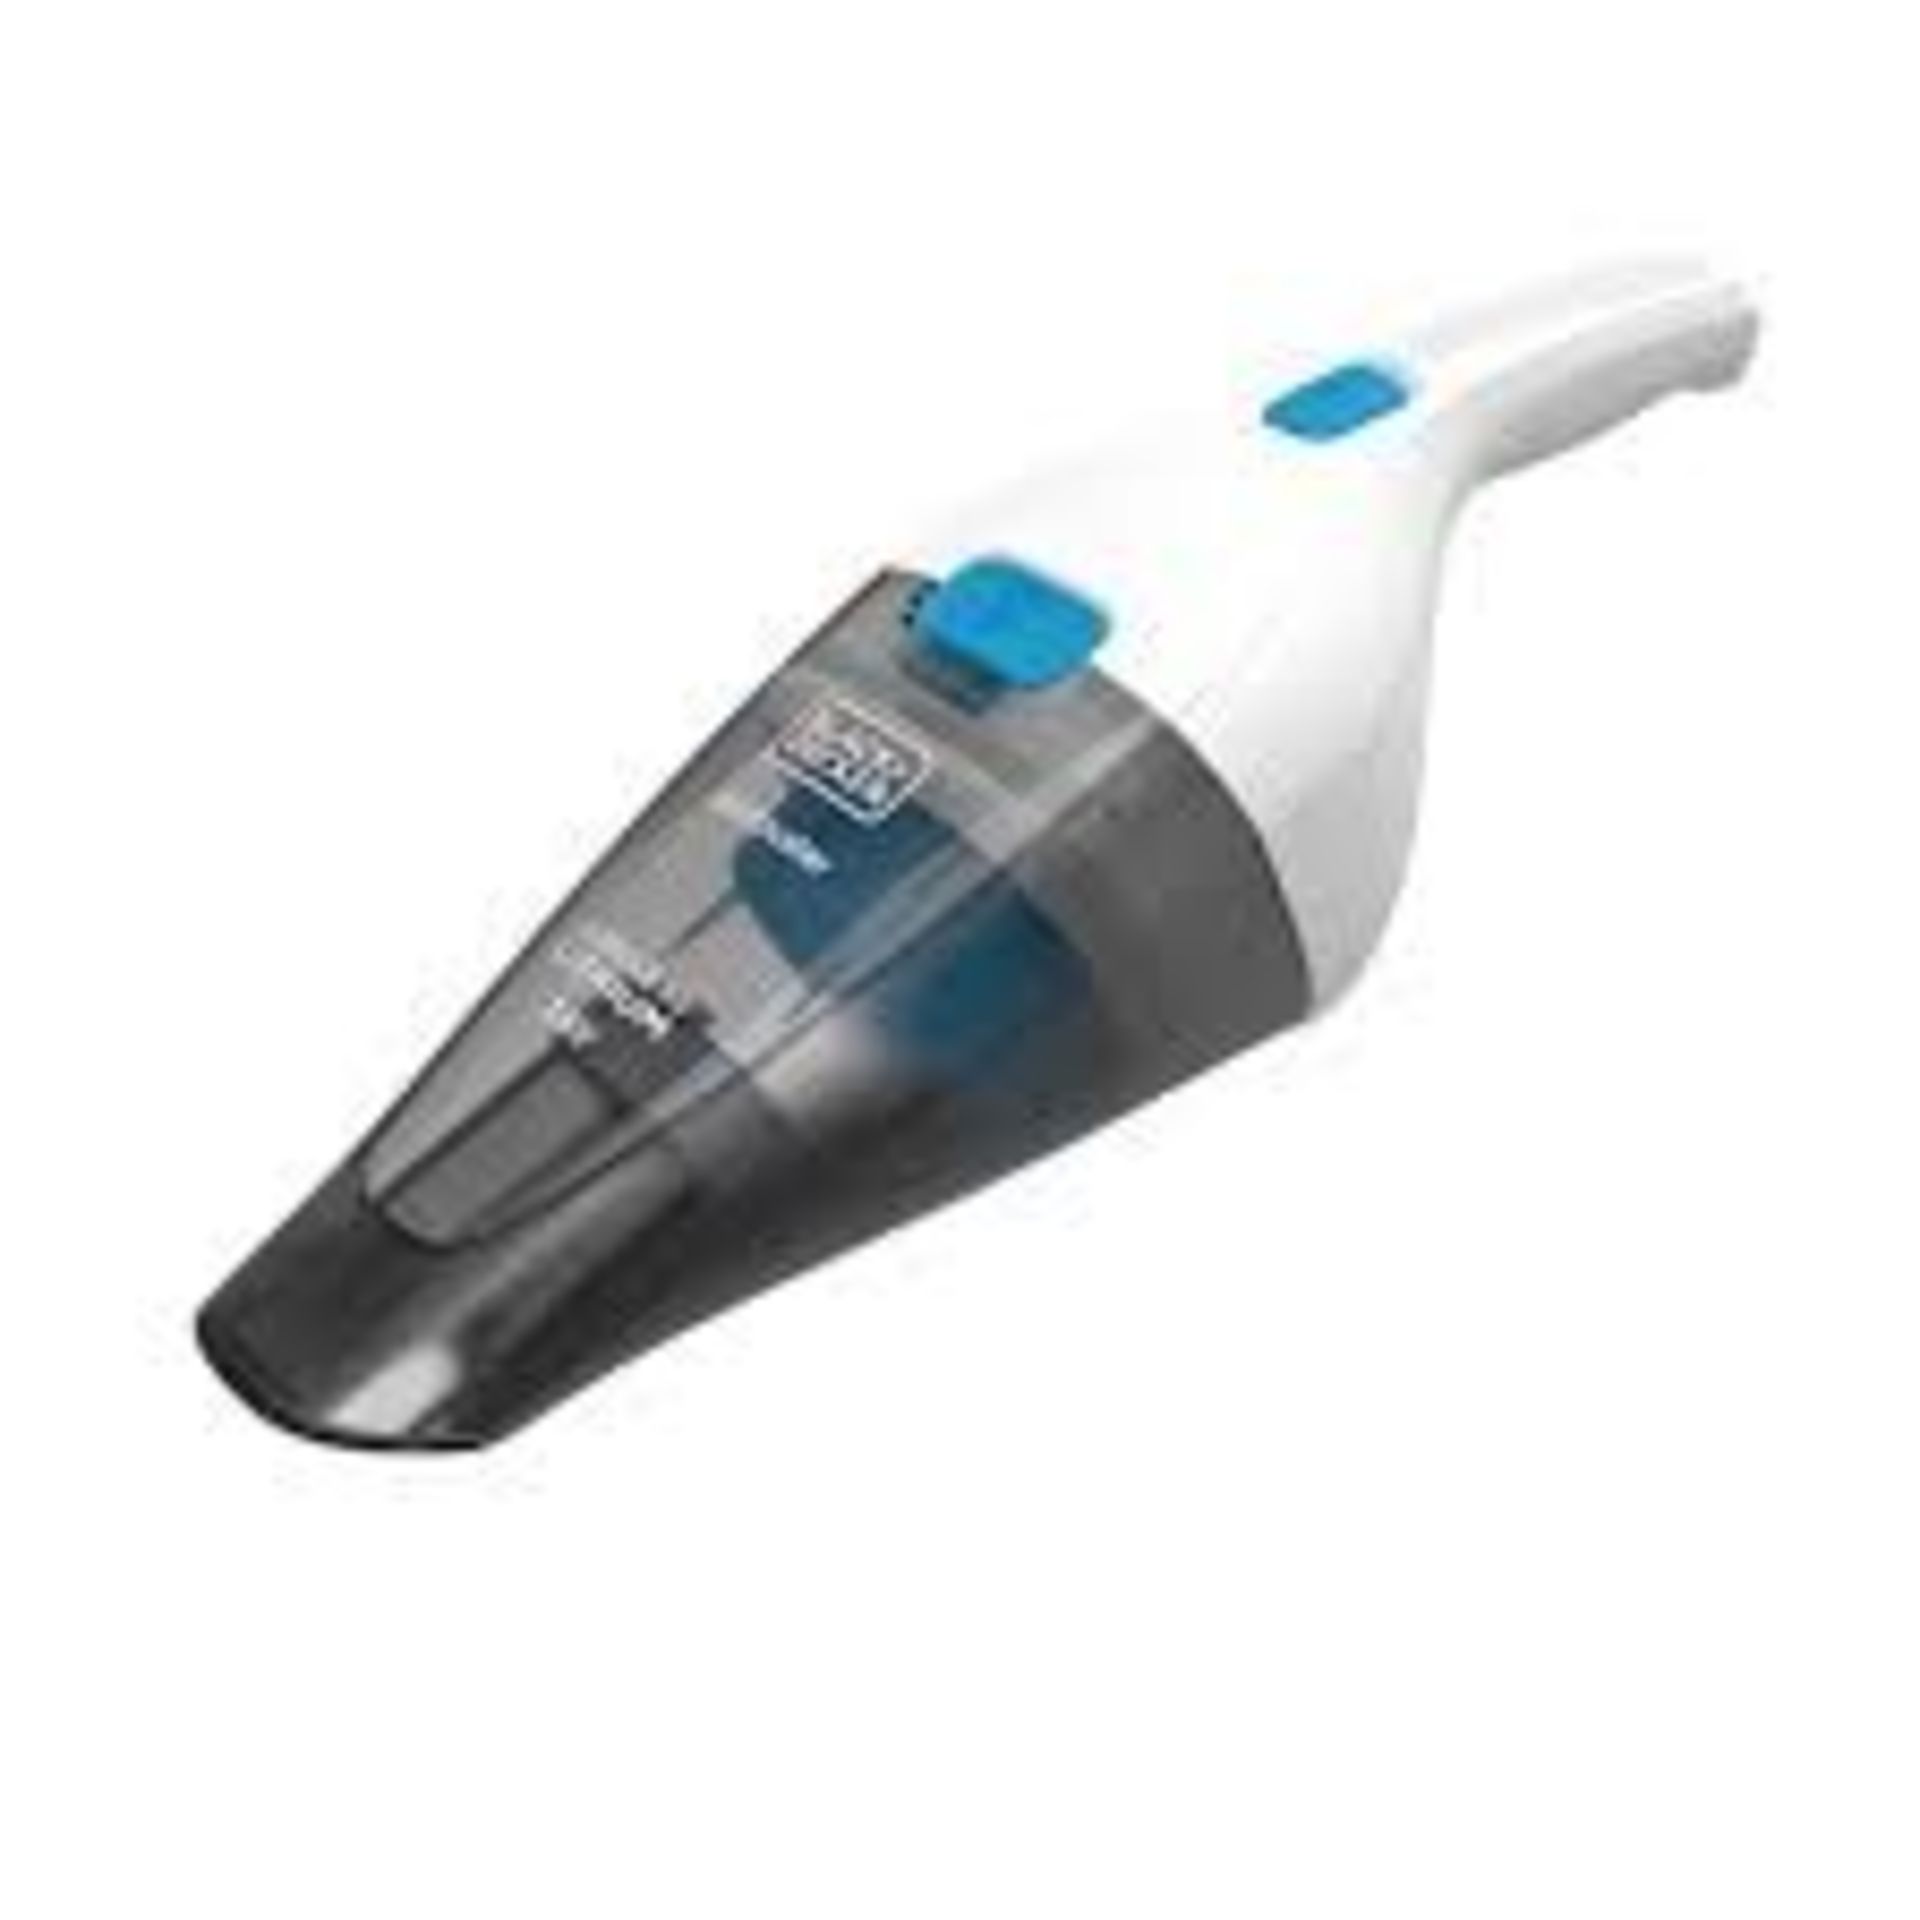 Black+Decker Dustbuster Cordless Hand Vacuum 3.6V. - R13a.11. Our innovative power tools and